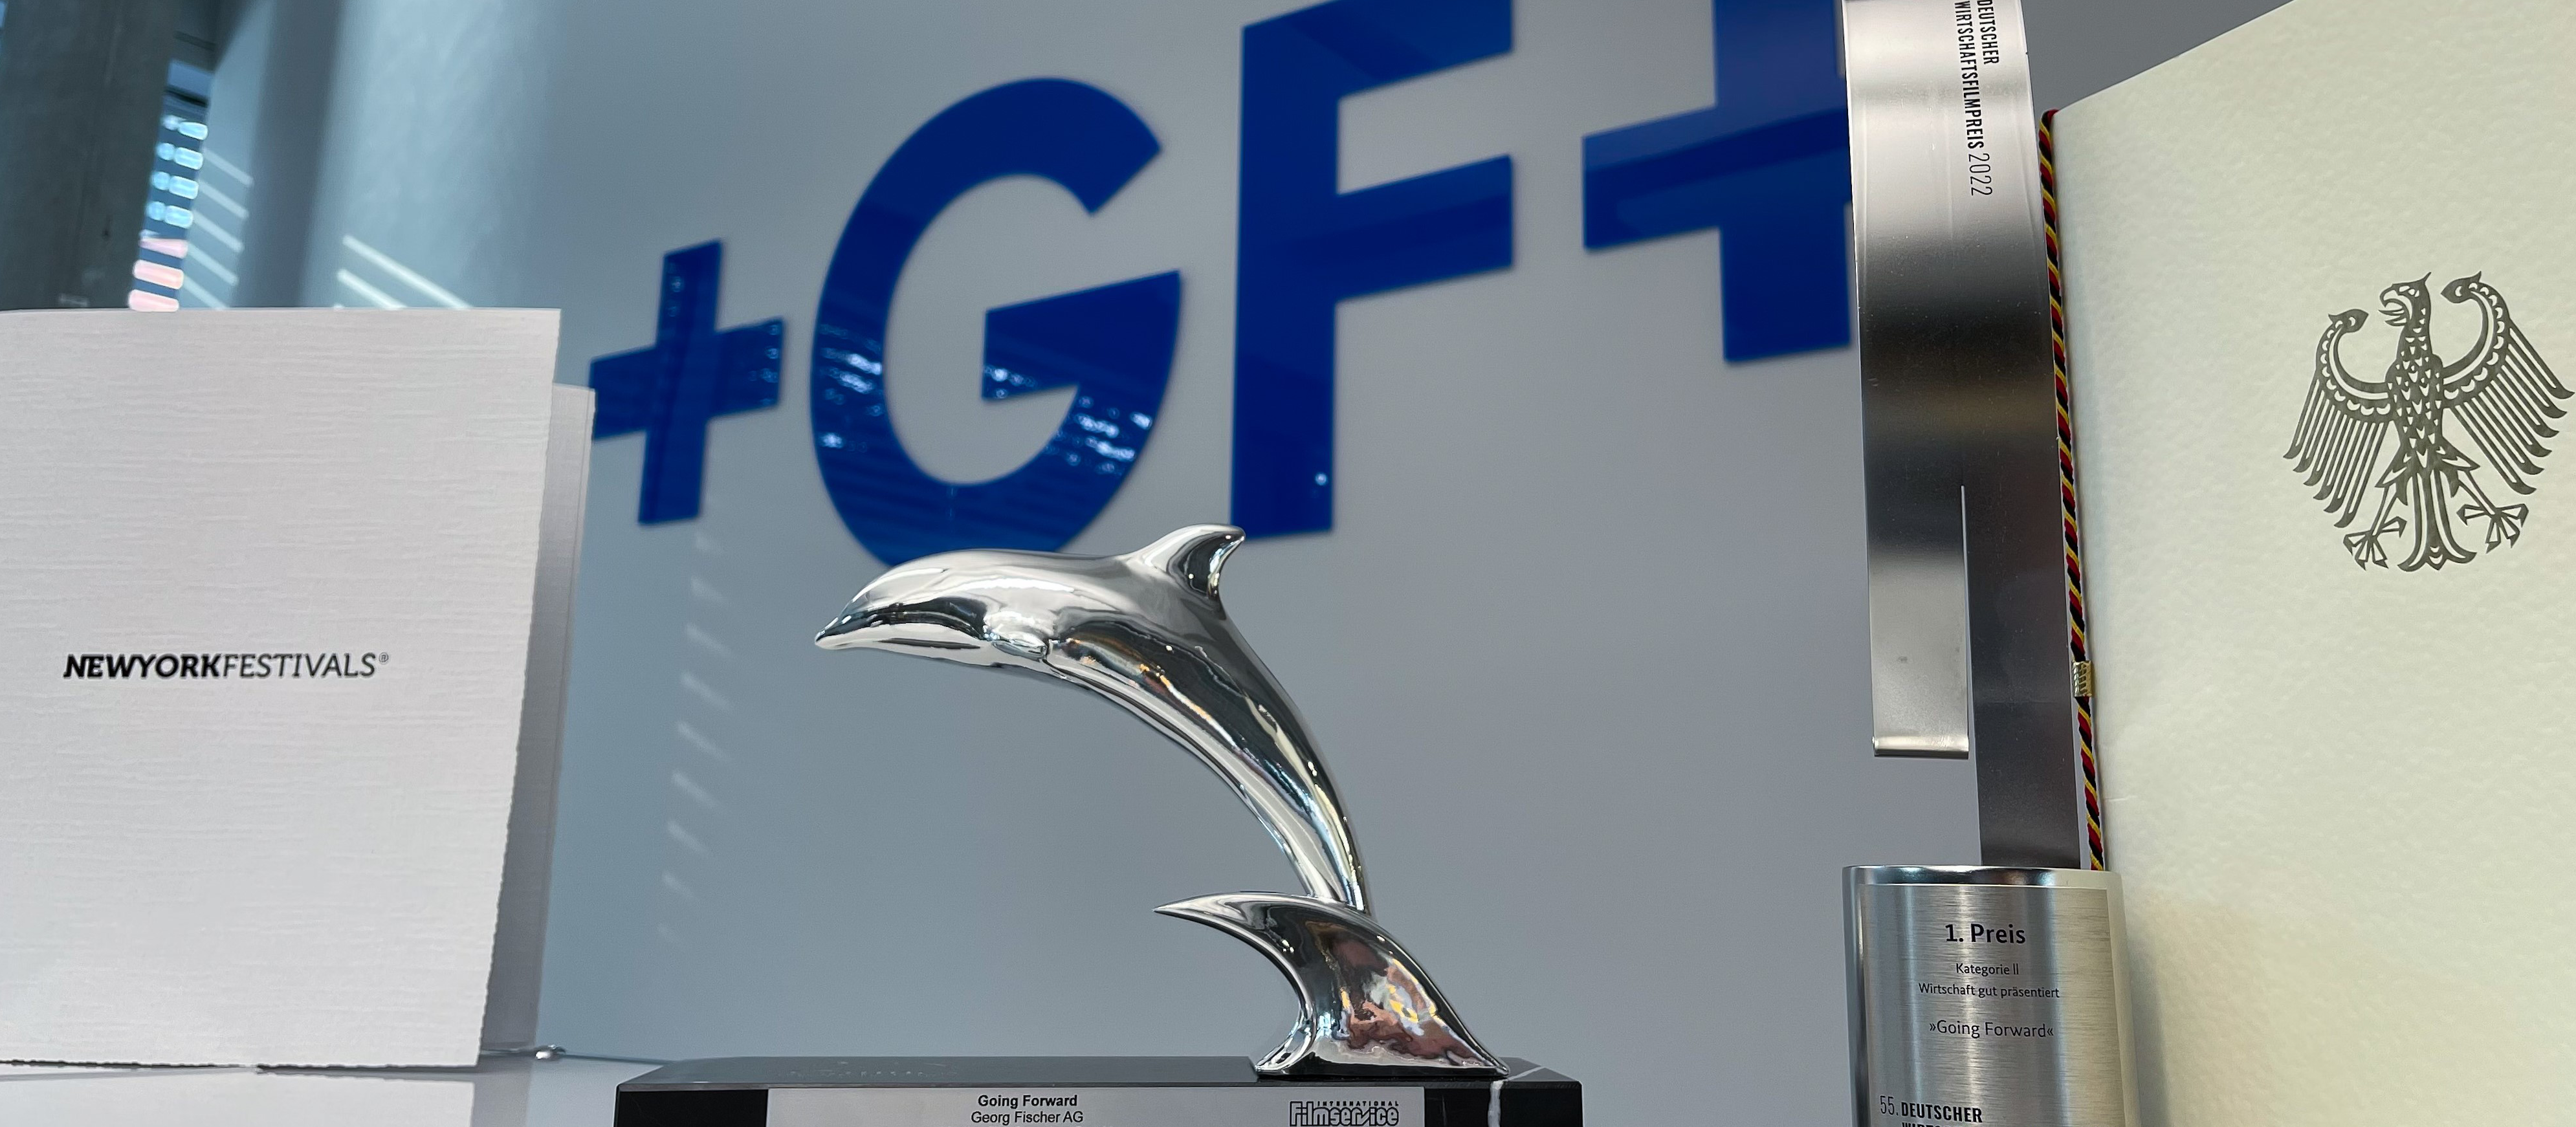 GF wins award for the Image Movie